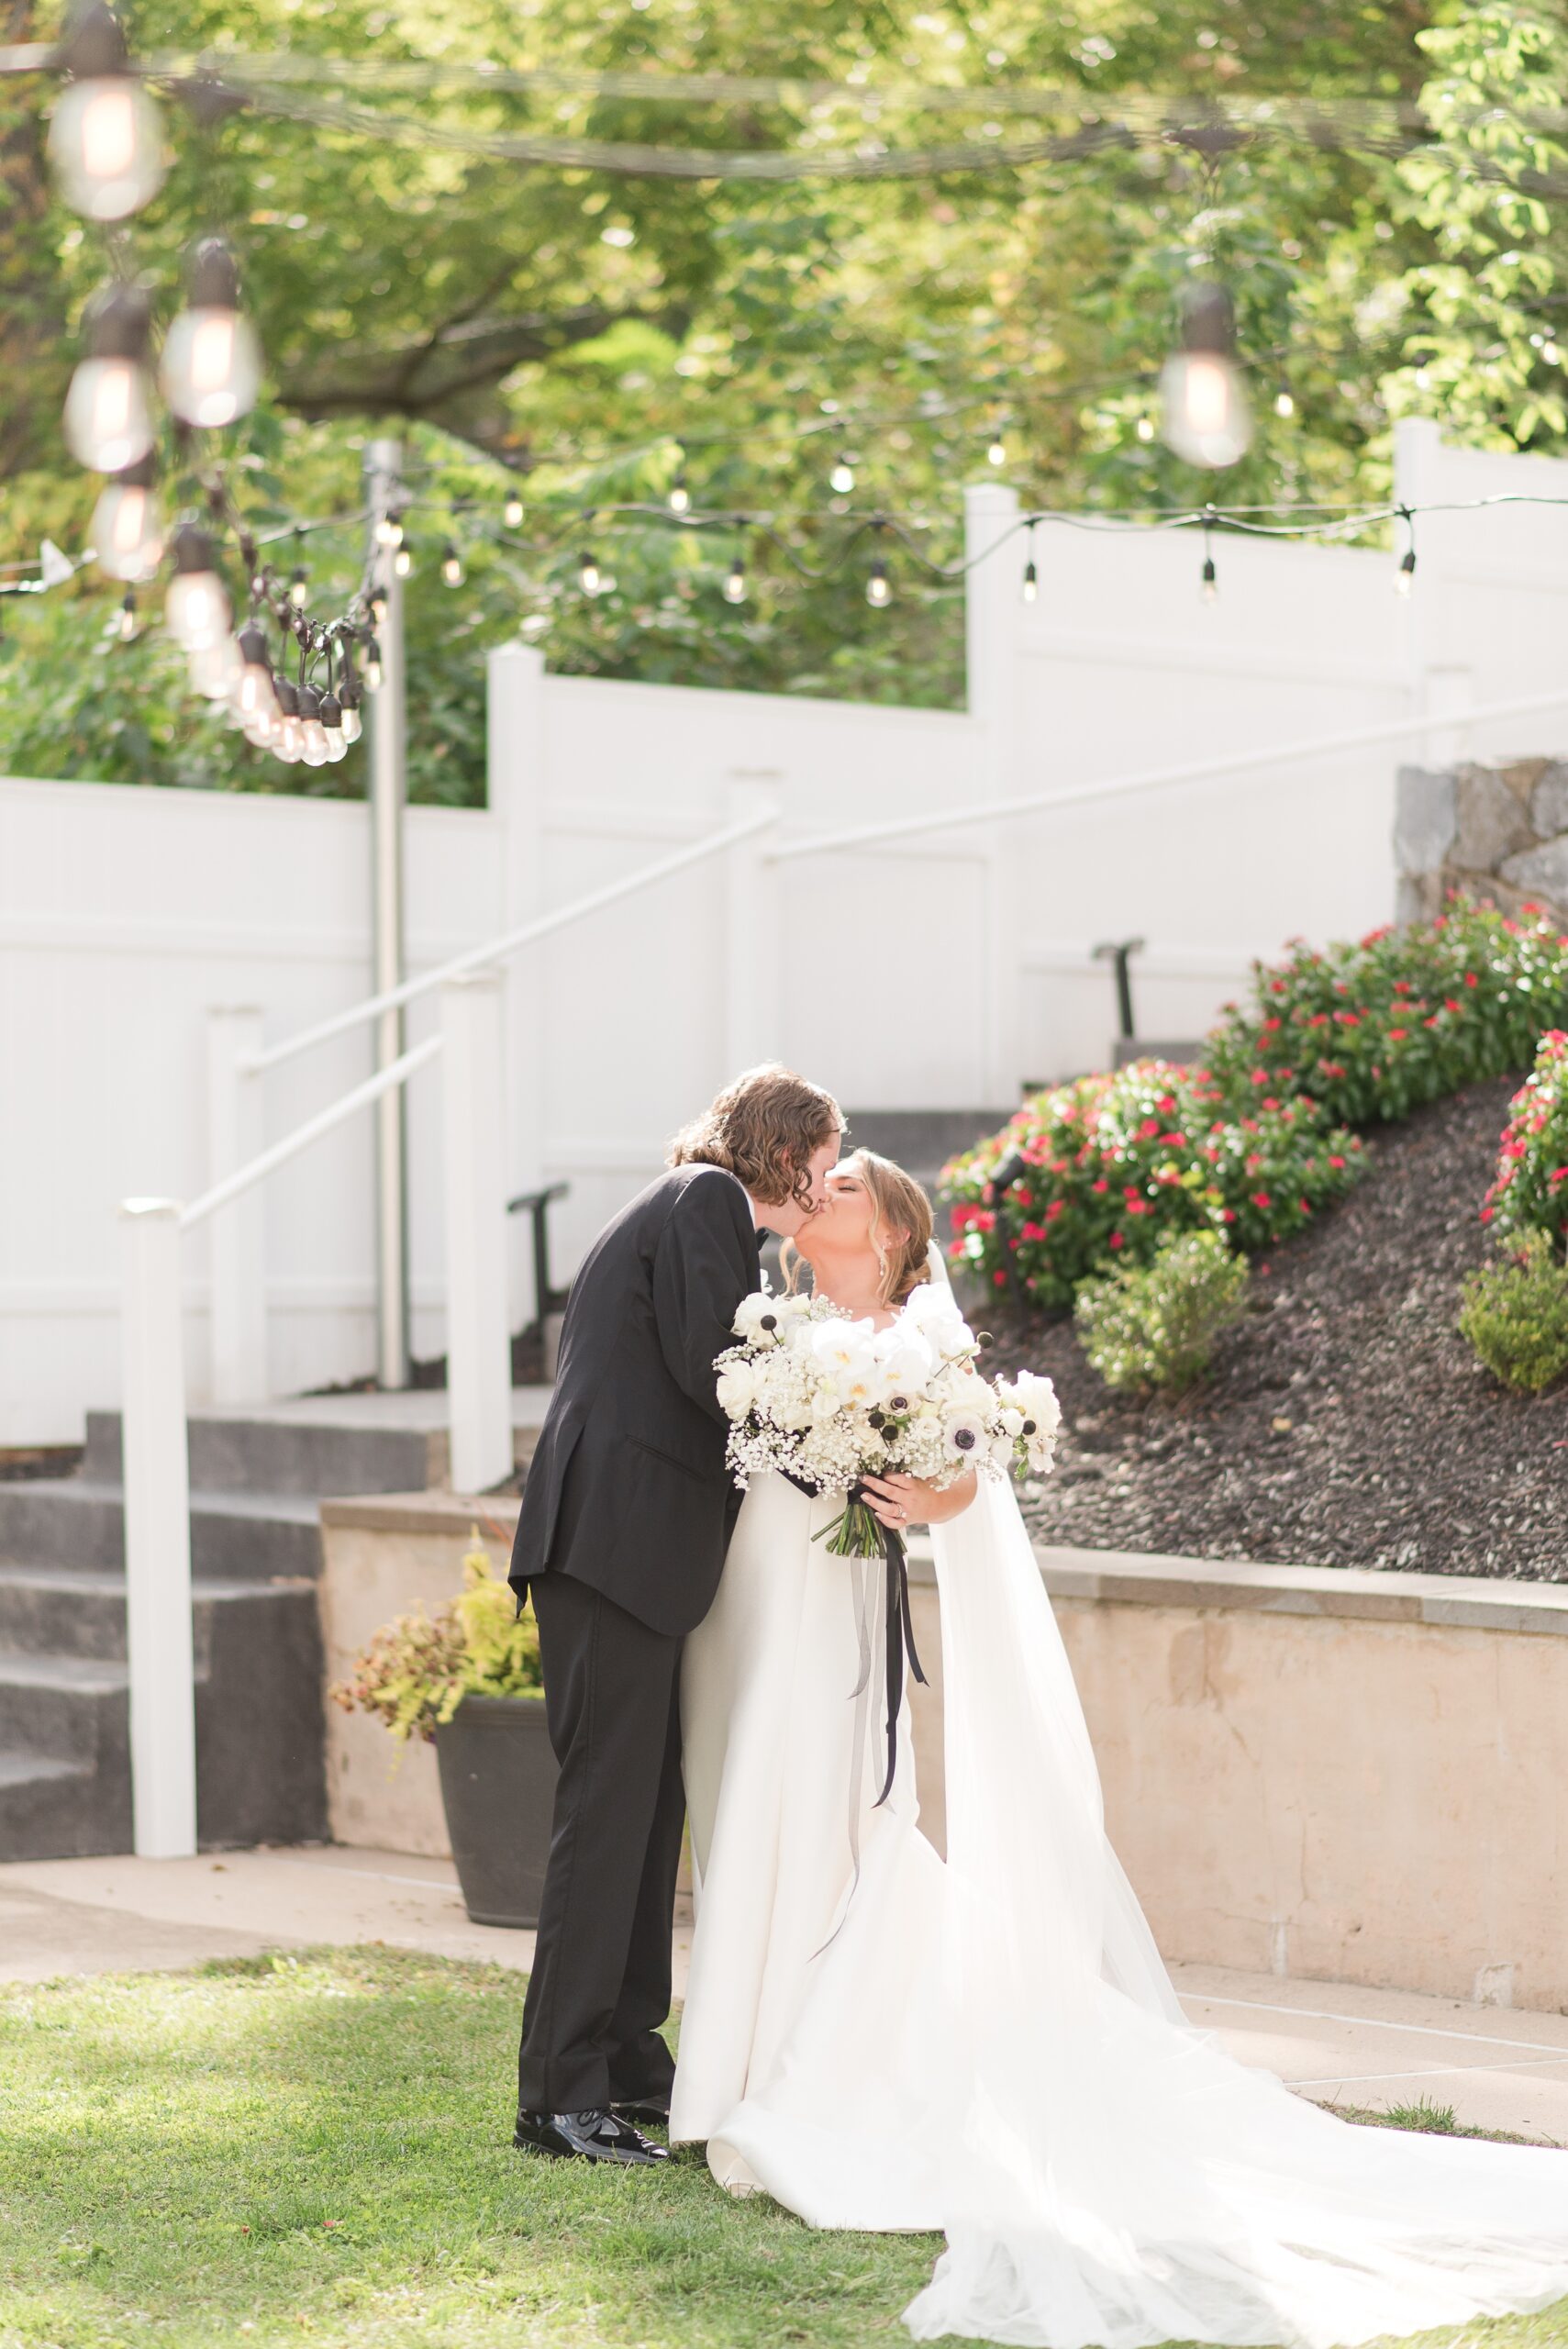 Newlyweds share a kiss in the gardens of the Milton Ridge Wedding venue